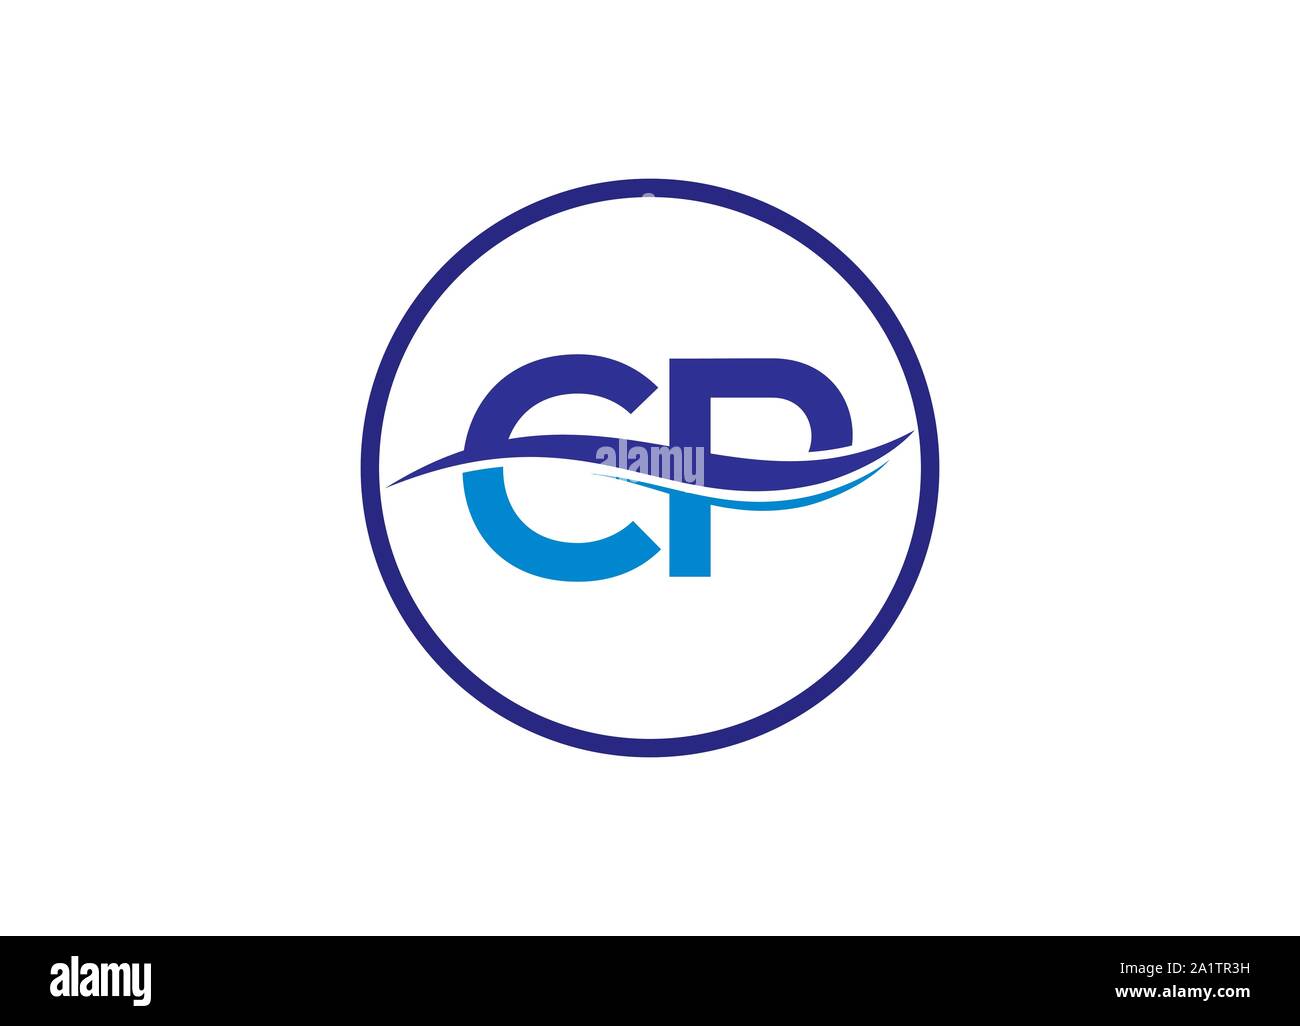 C P letter logo, c&p letter with wave logo Stock Vector Image ...